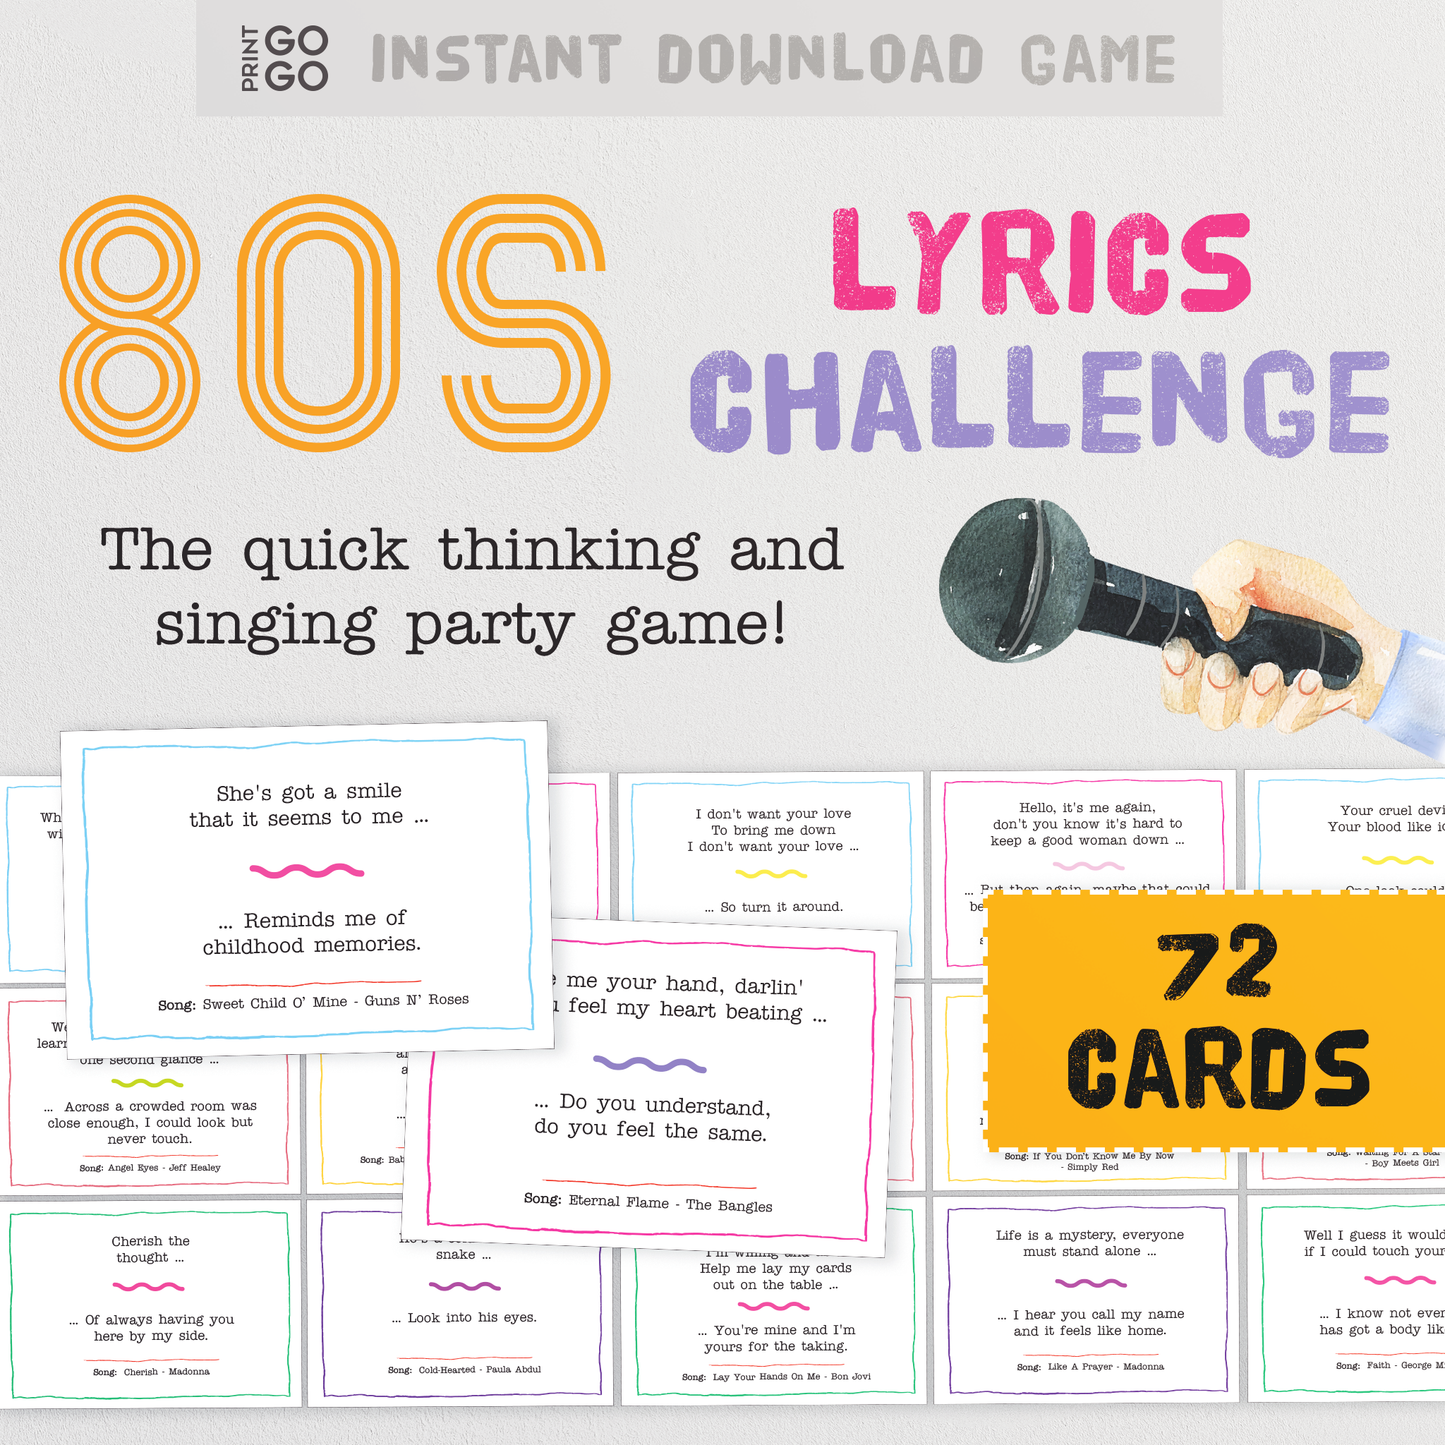 80s Songs Lyrics Challenge Game - The Quick Thinking and Singing Family Party Game